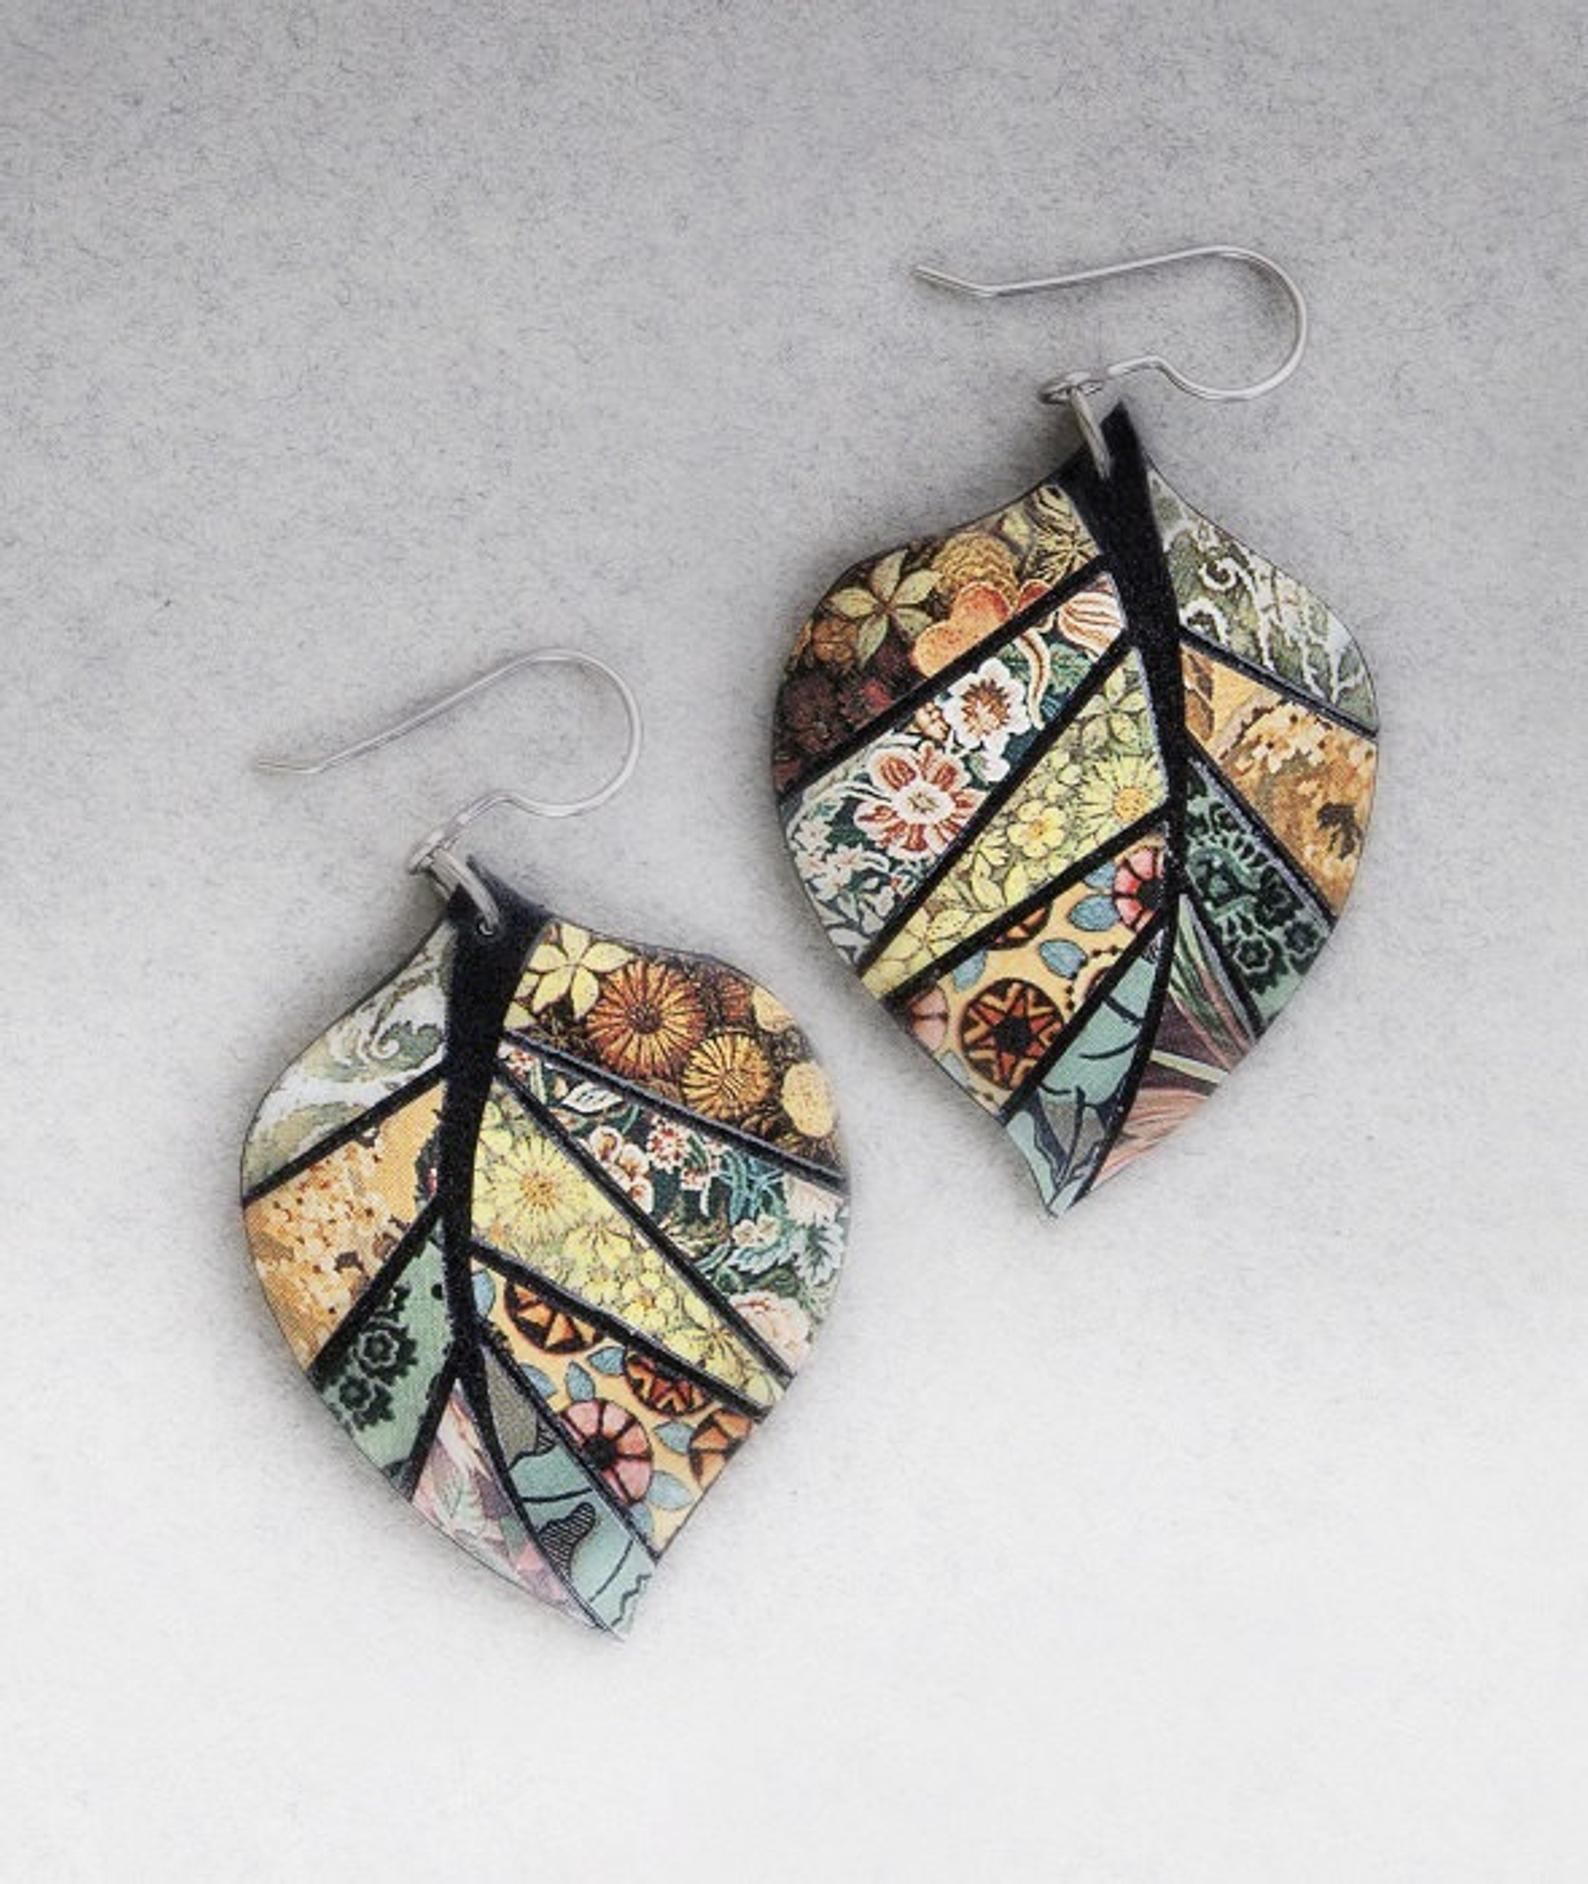 Paper Mosaic Leaf Earrings - Medium Leaf Earrings - Upcycled Earrings - Any Color Choice - MADE-TO-ORDER - Paper Mosaic Leaf Earrings - Medium Leaf Earrings - Upcycled Earrings - Any Color Choice - MADE-TO-ORDER -   13 diy Paper jewelry ideas